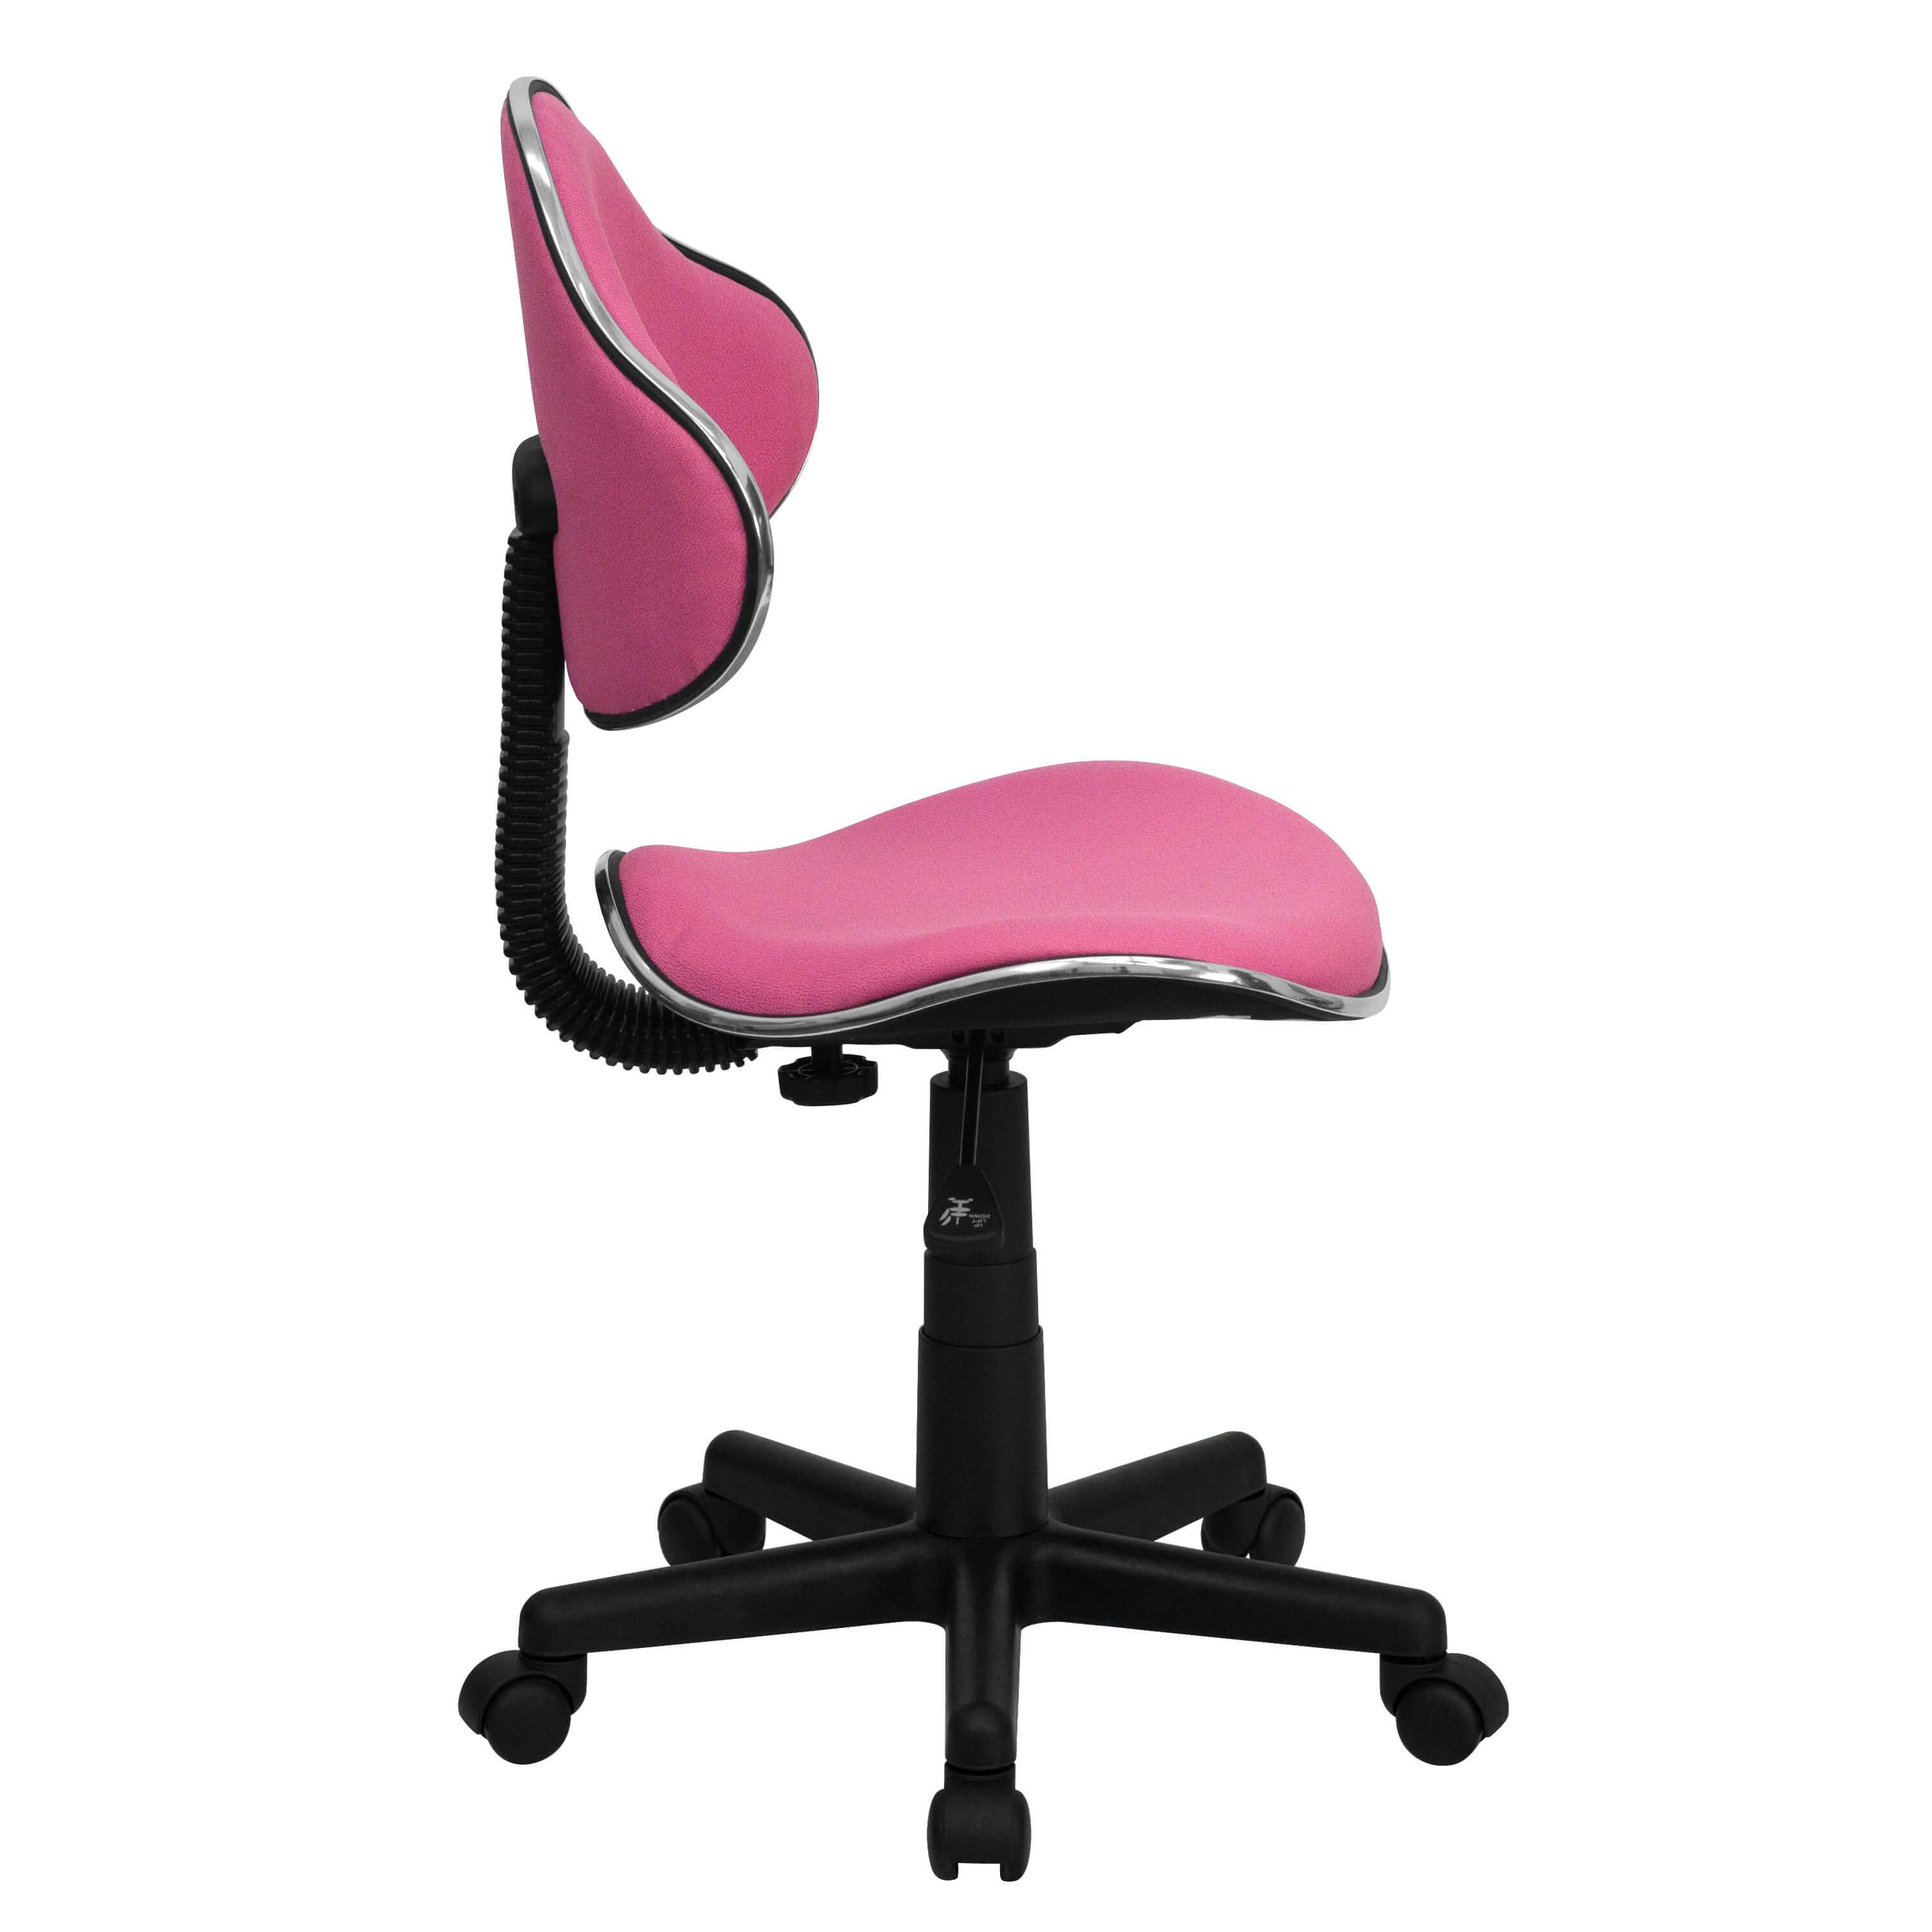 Armless office chair side view